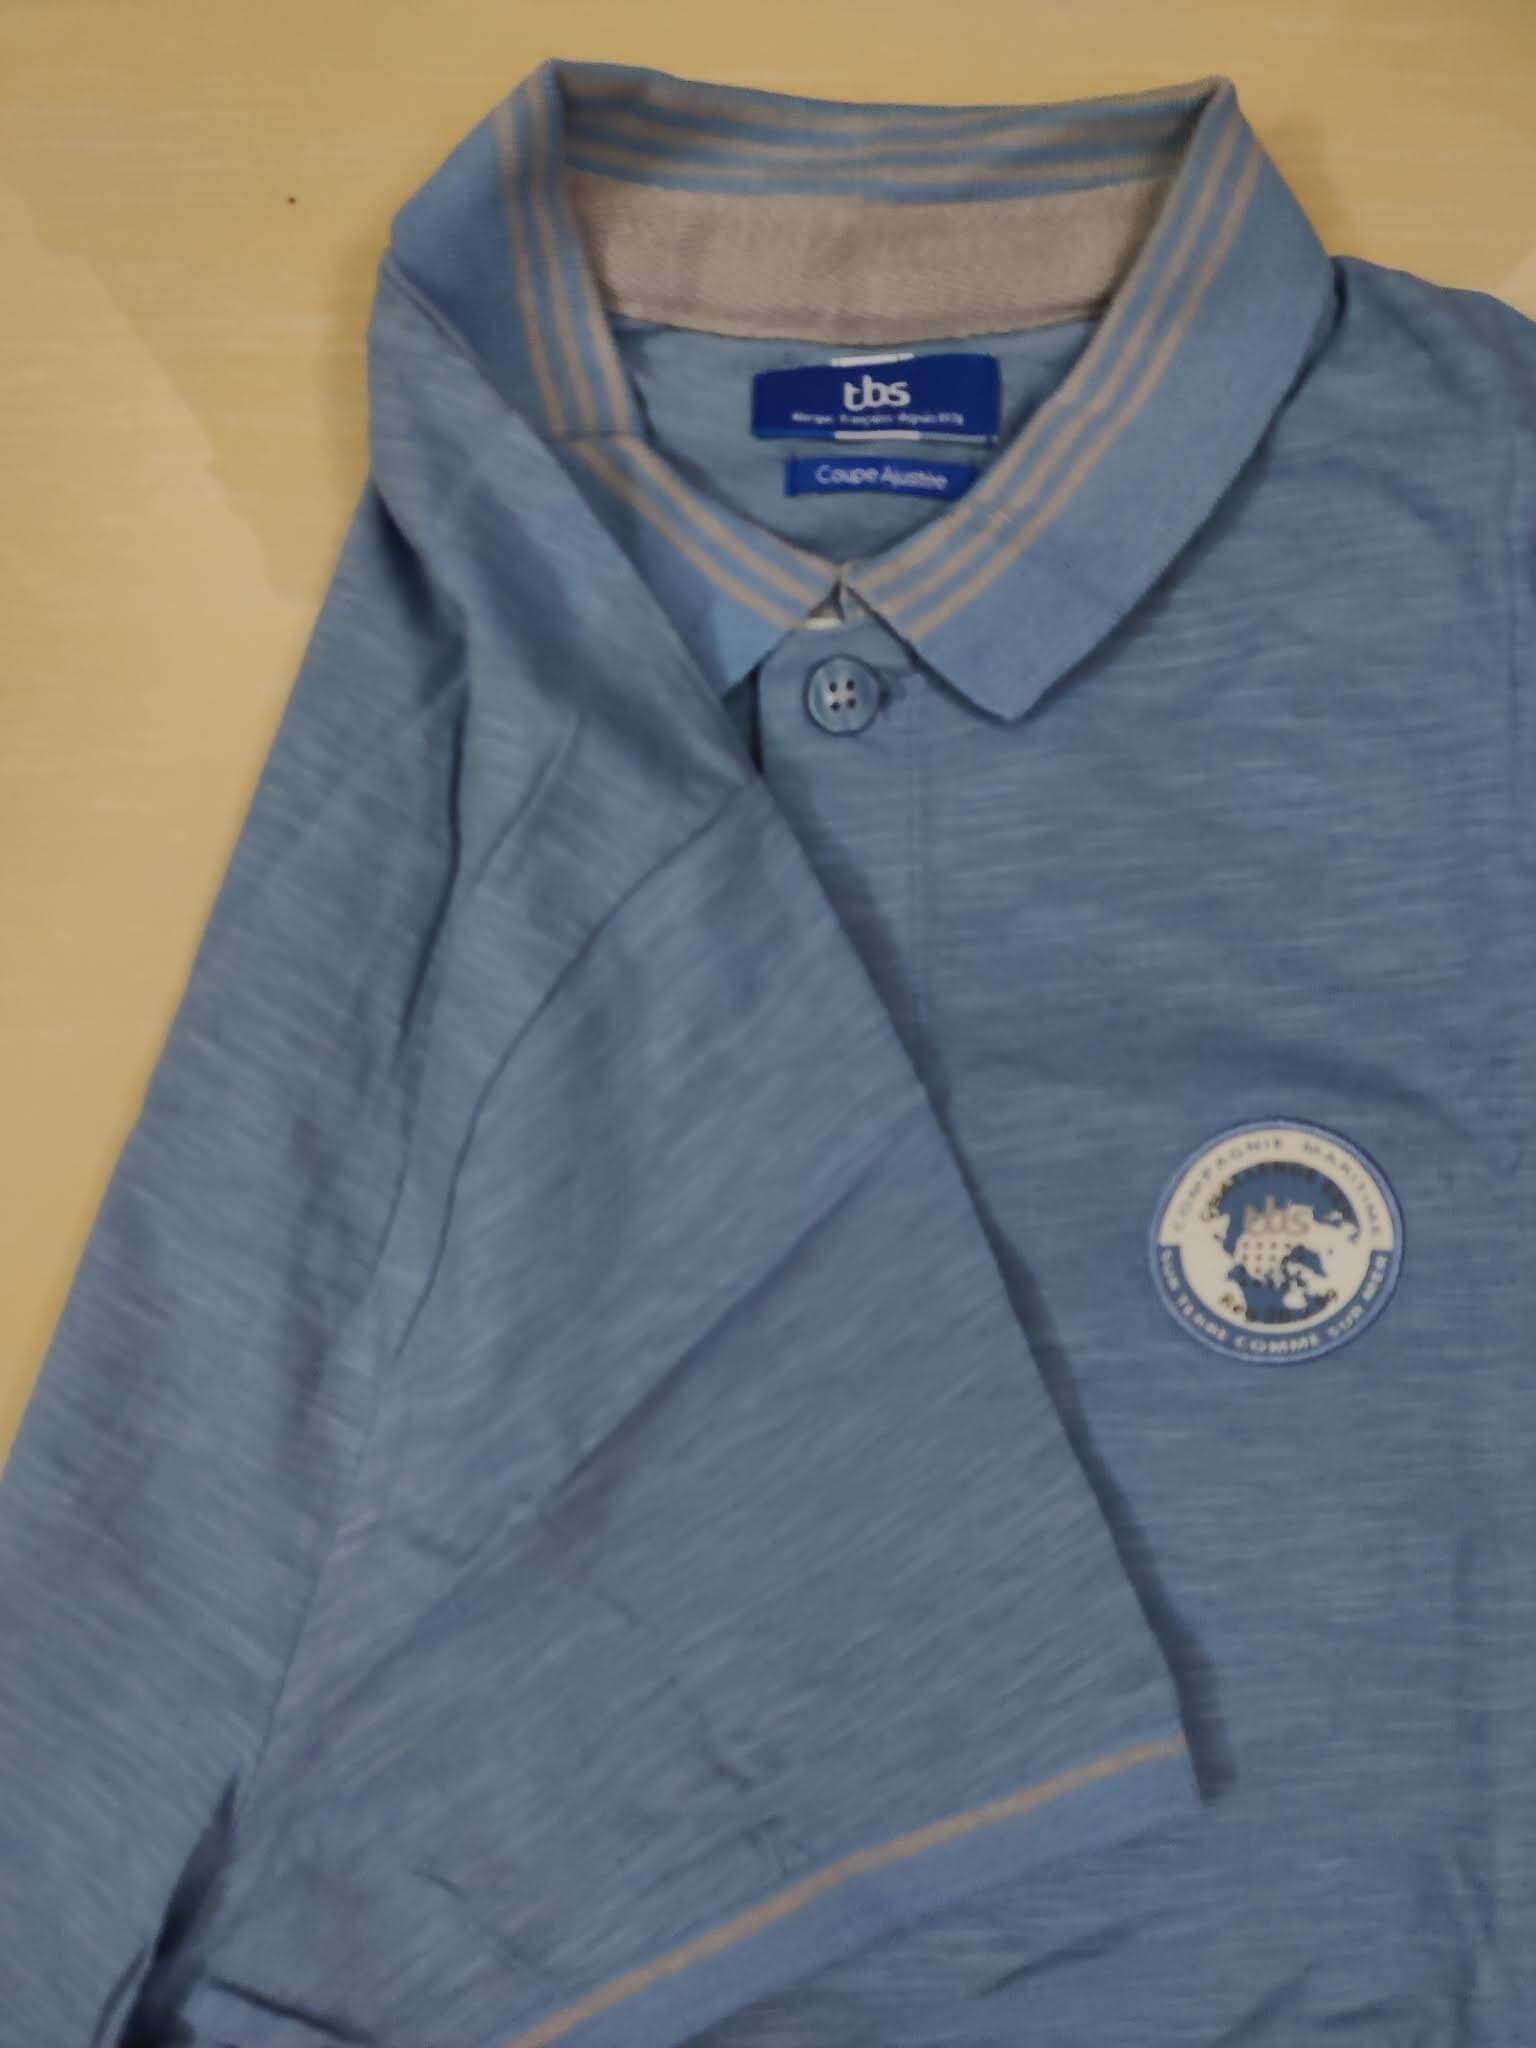 Solid Dull Light Blue Polo T Shirt